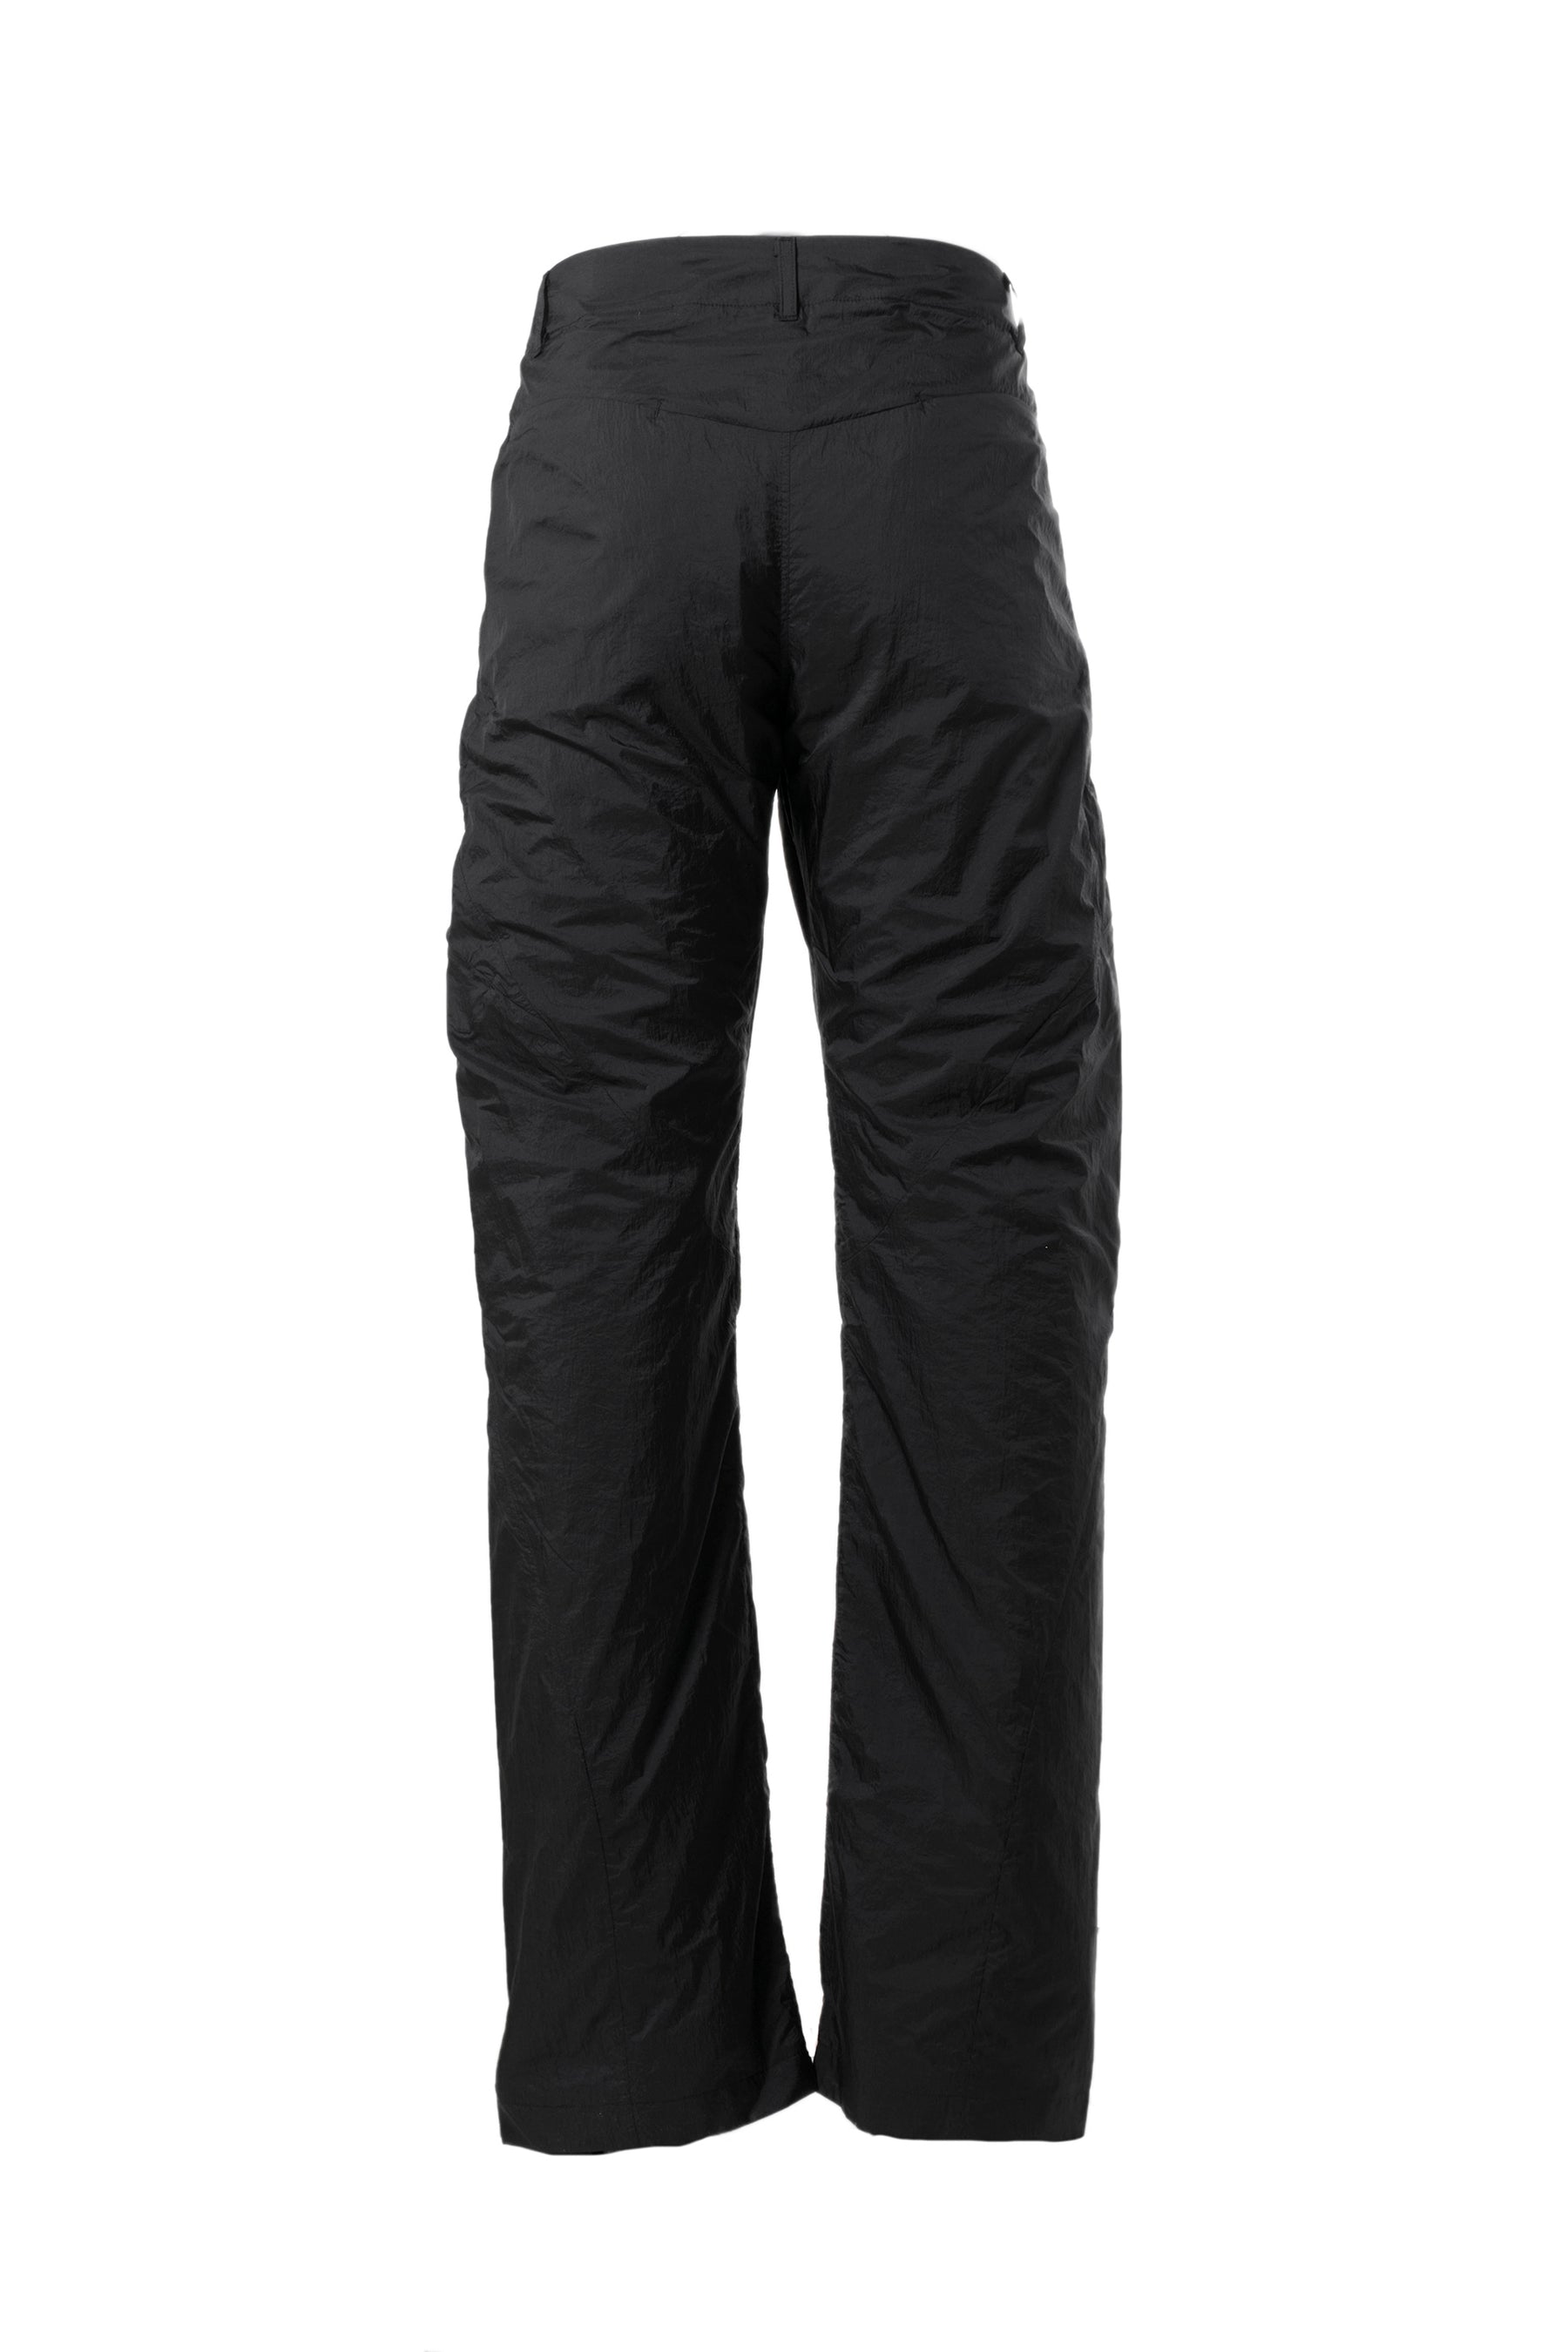 5.0+ TROUSERS CENTER / BLK/CHA